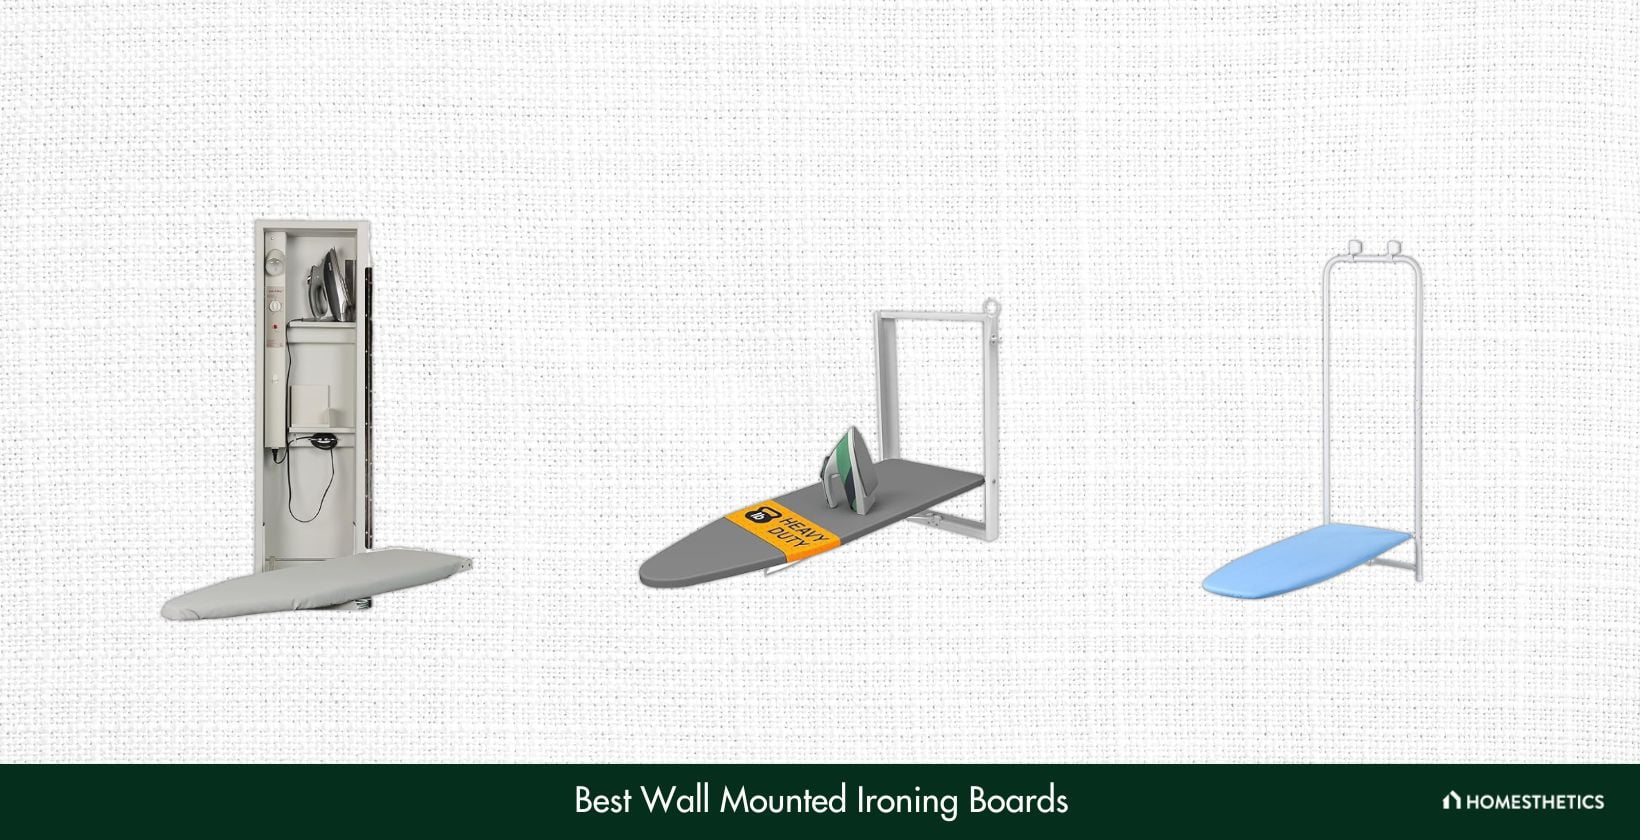 Best Wall Mounted Ironing Boards